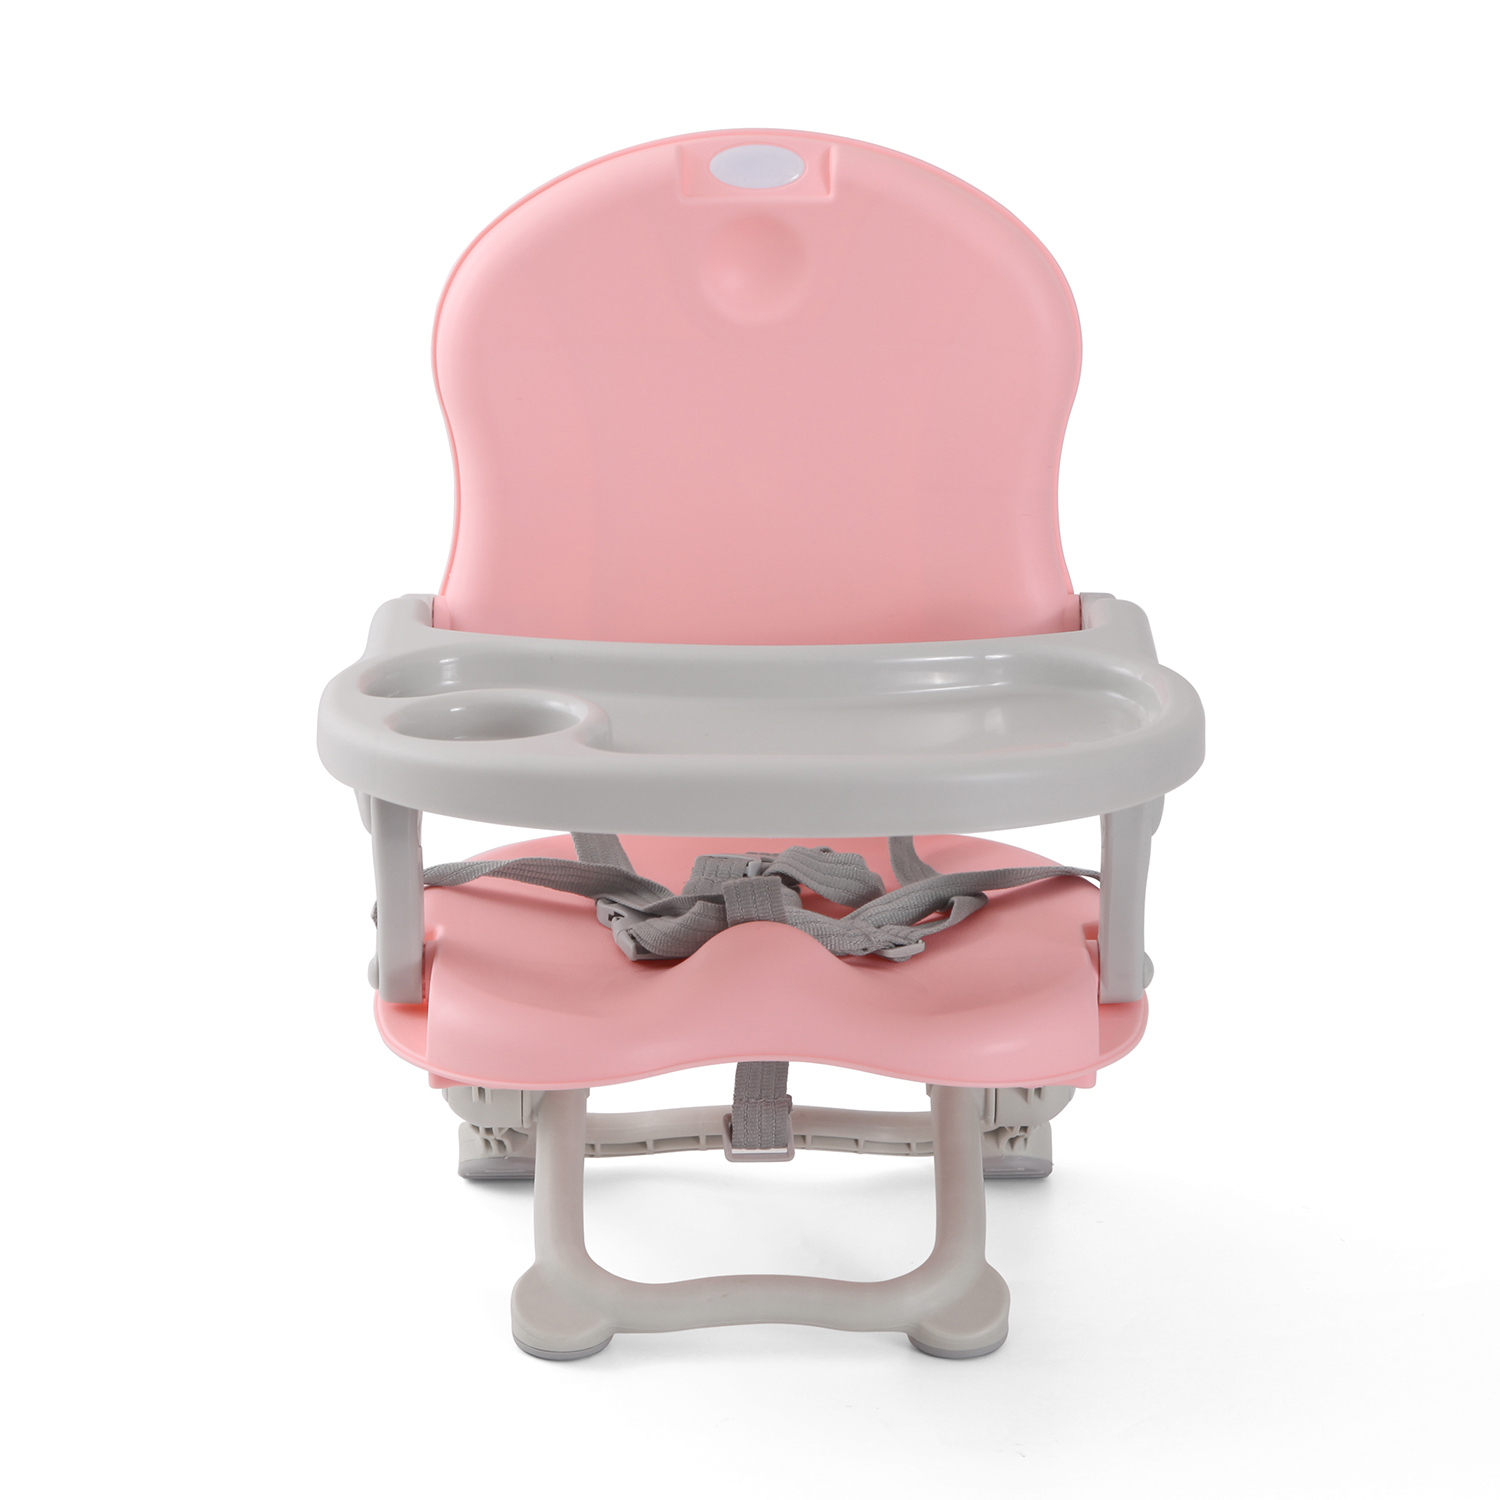 Baby Travel Dining Chair - Pink,Baby Travel Dining Chair - Pink